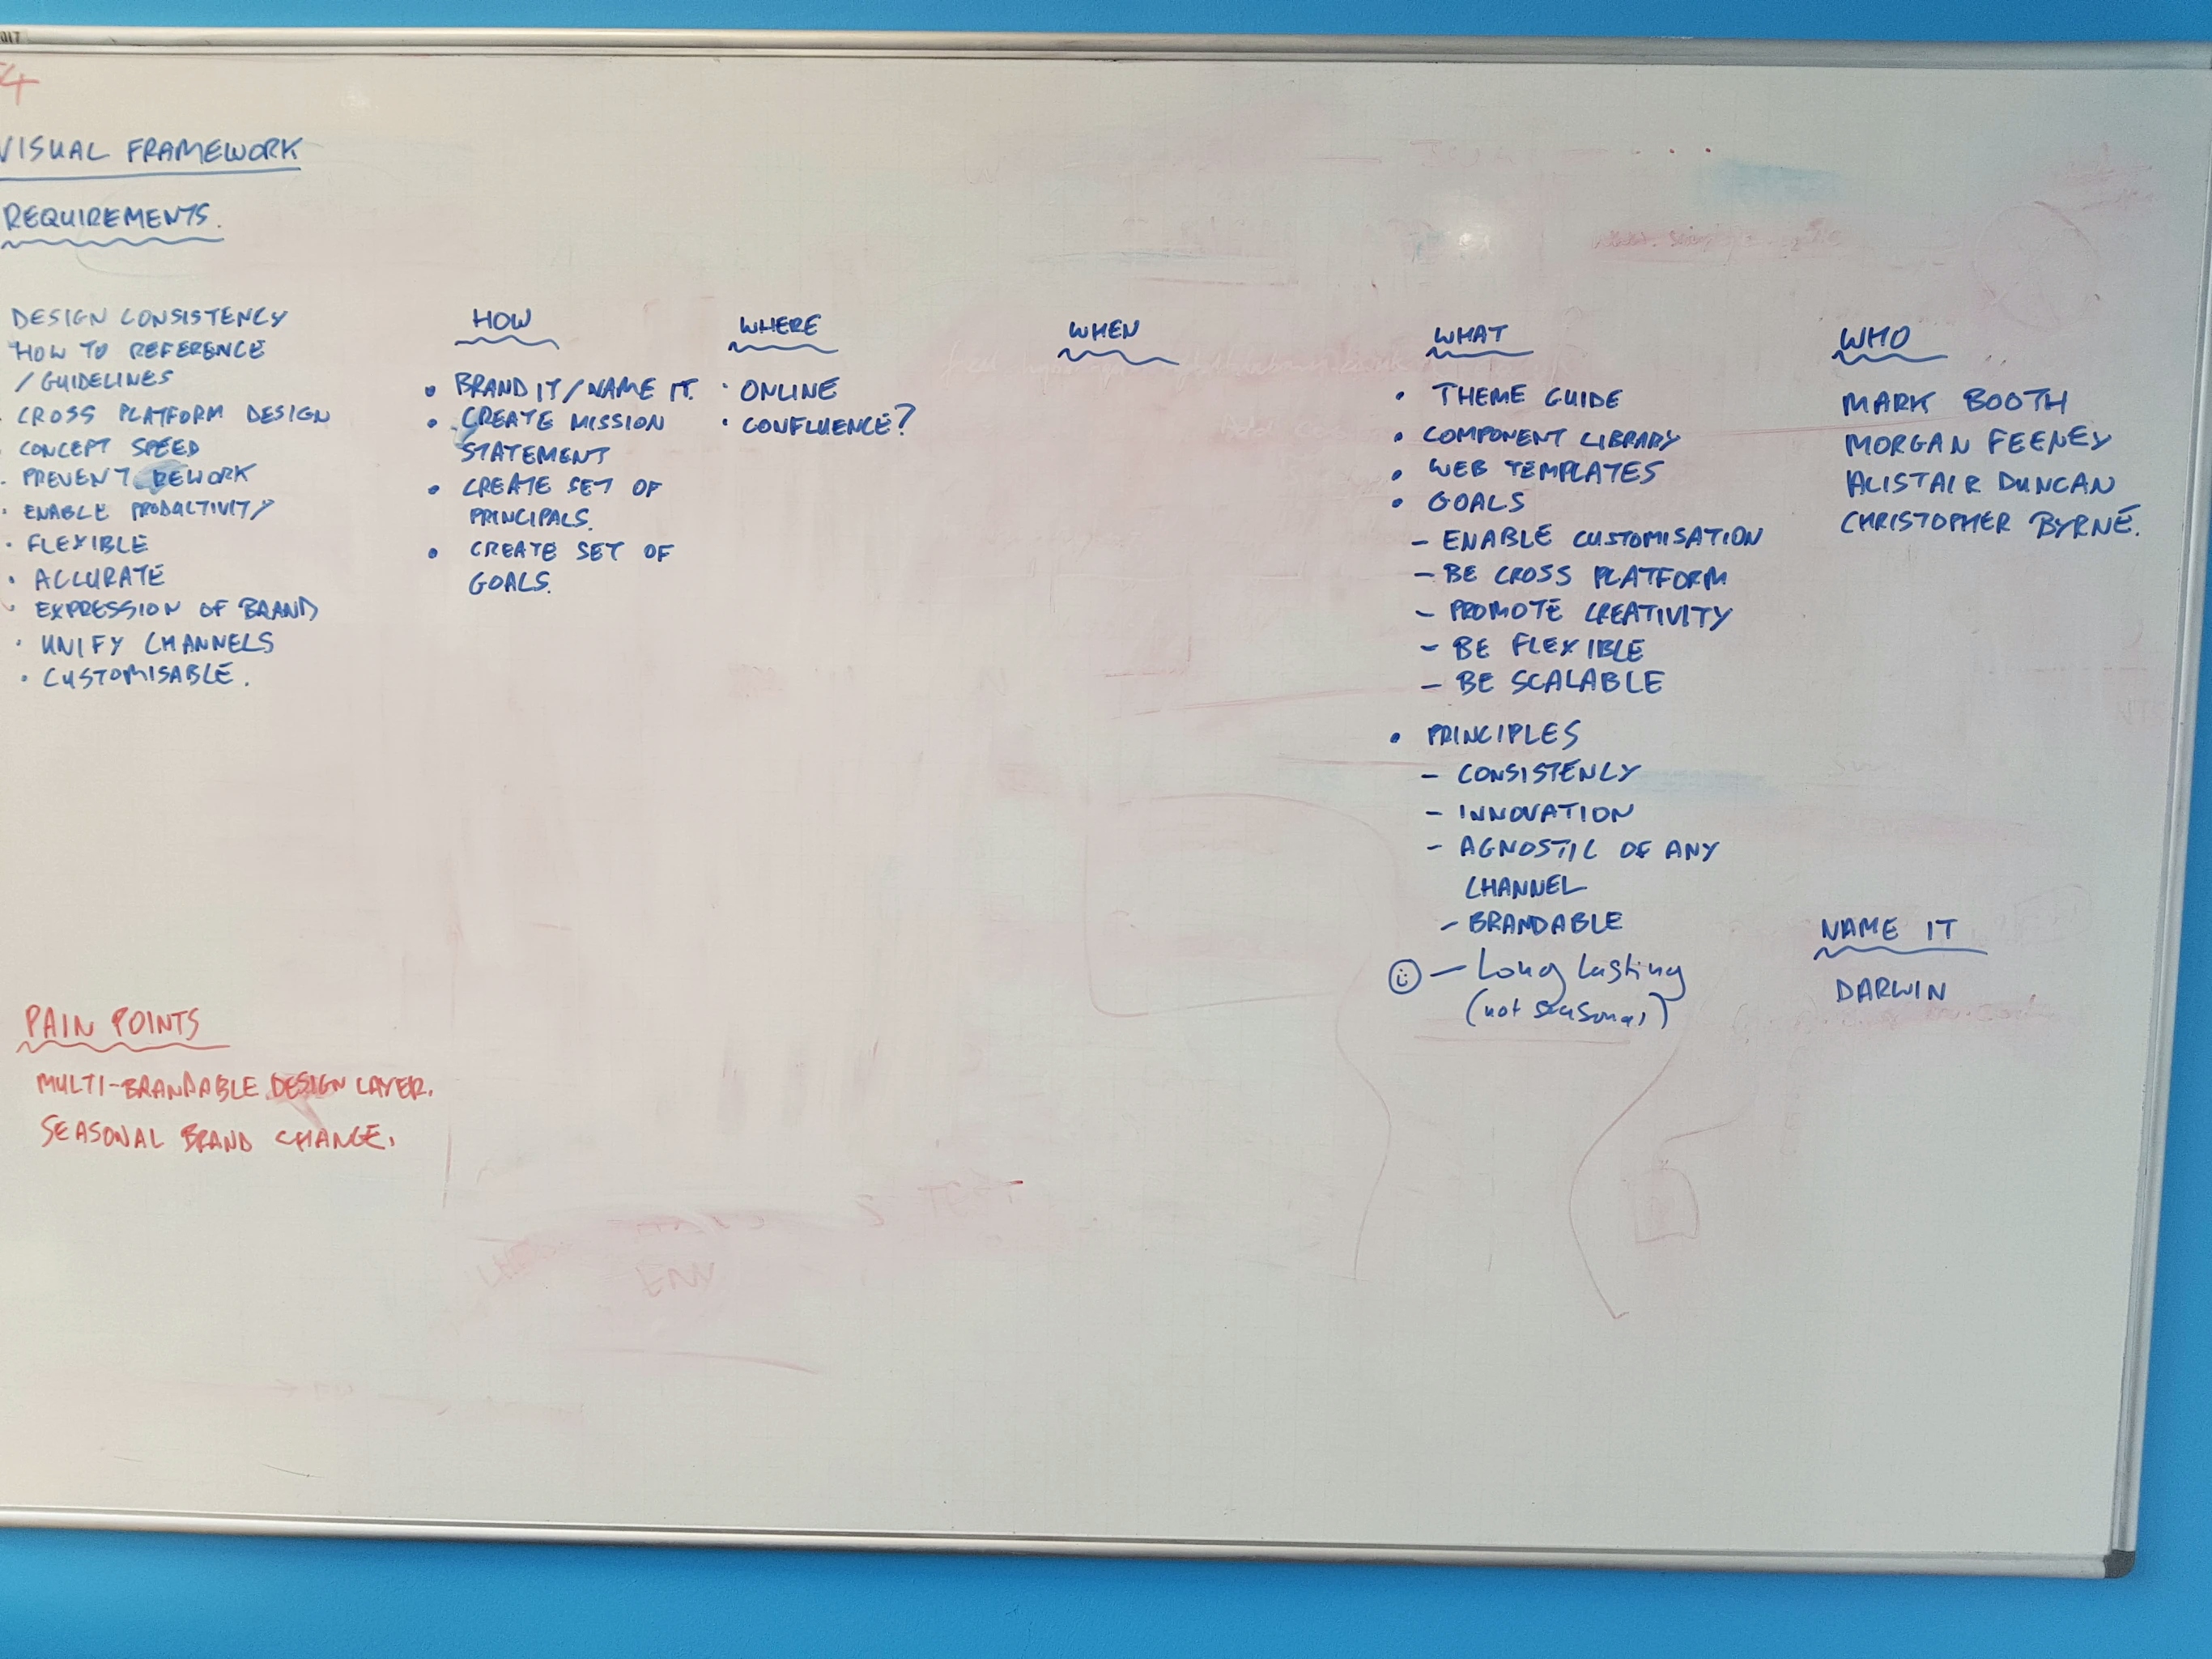 Photo of whiteboard taken from an initial workshop from the Discovery phase